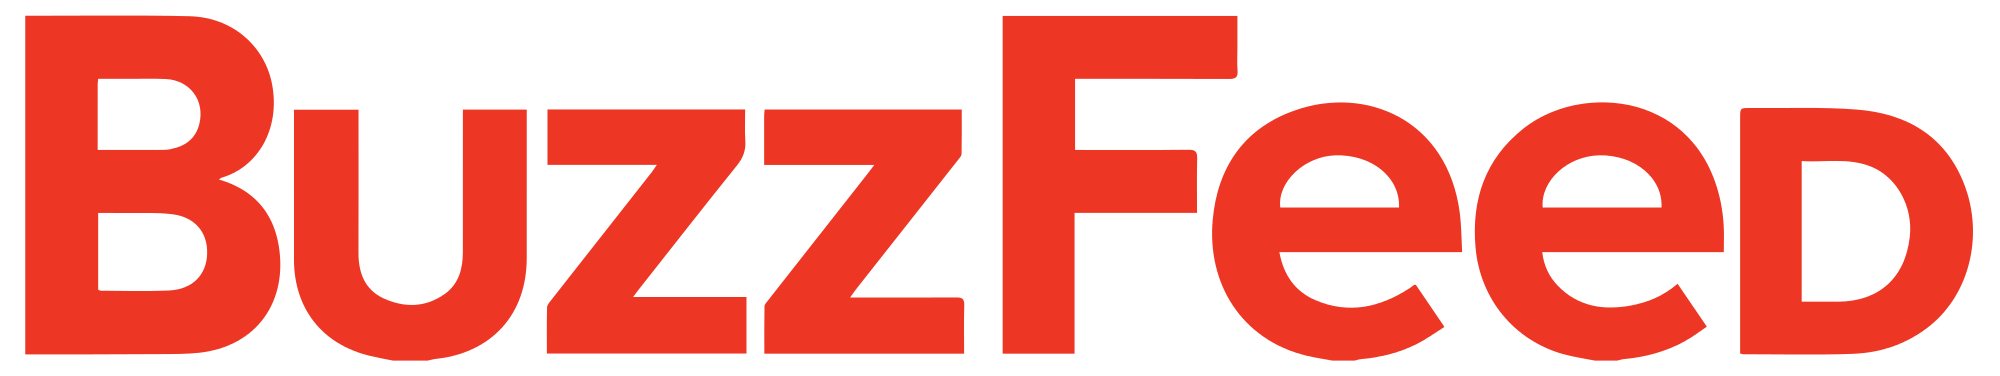 Buzzfeed Logo Transparent Png   Pluspng - Buzzfeed, Transparent background PNG HD thumbnail